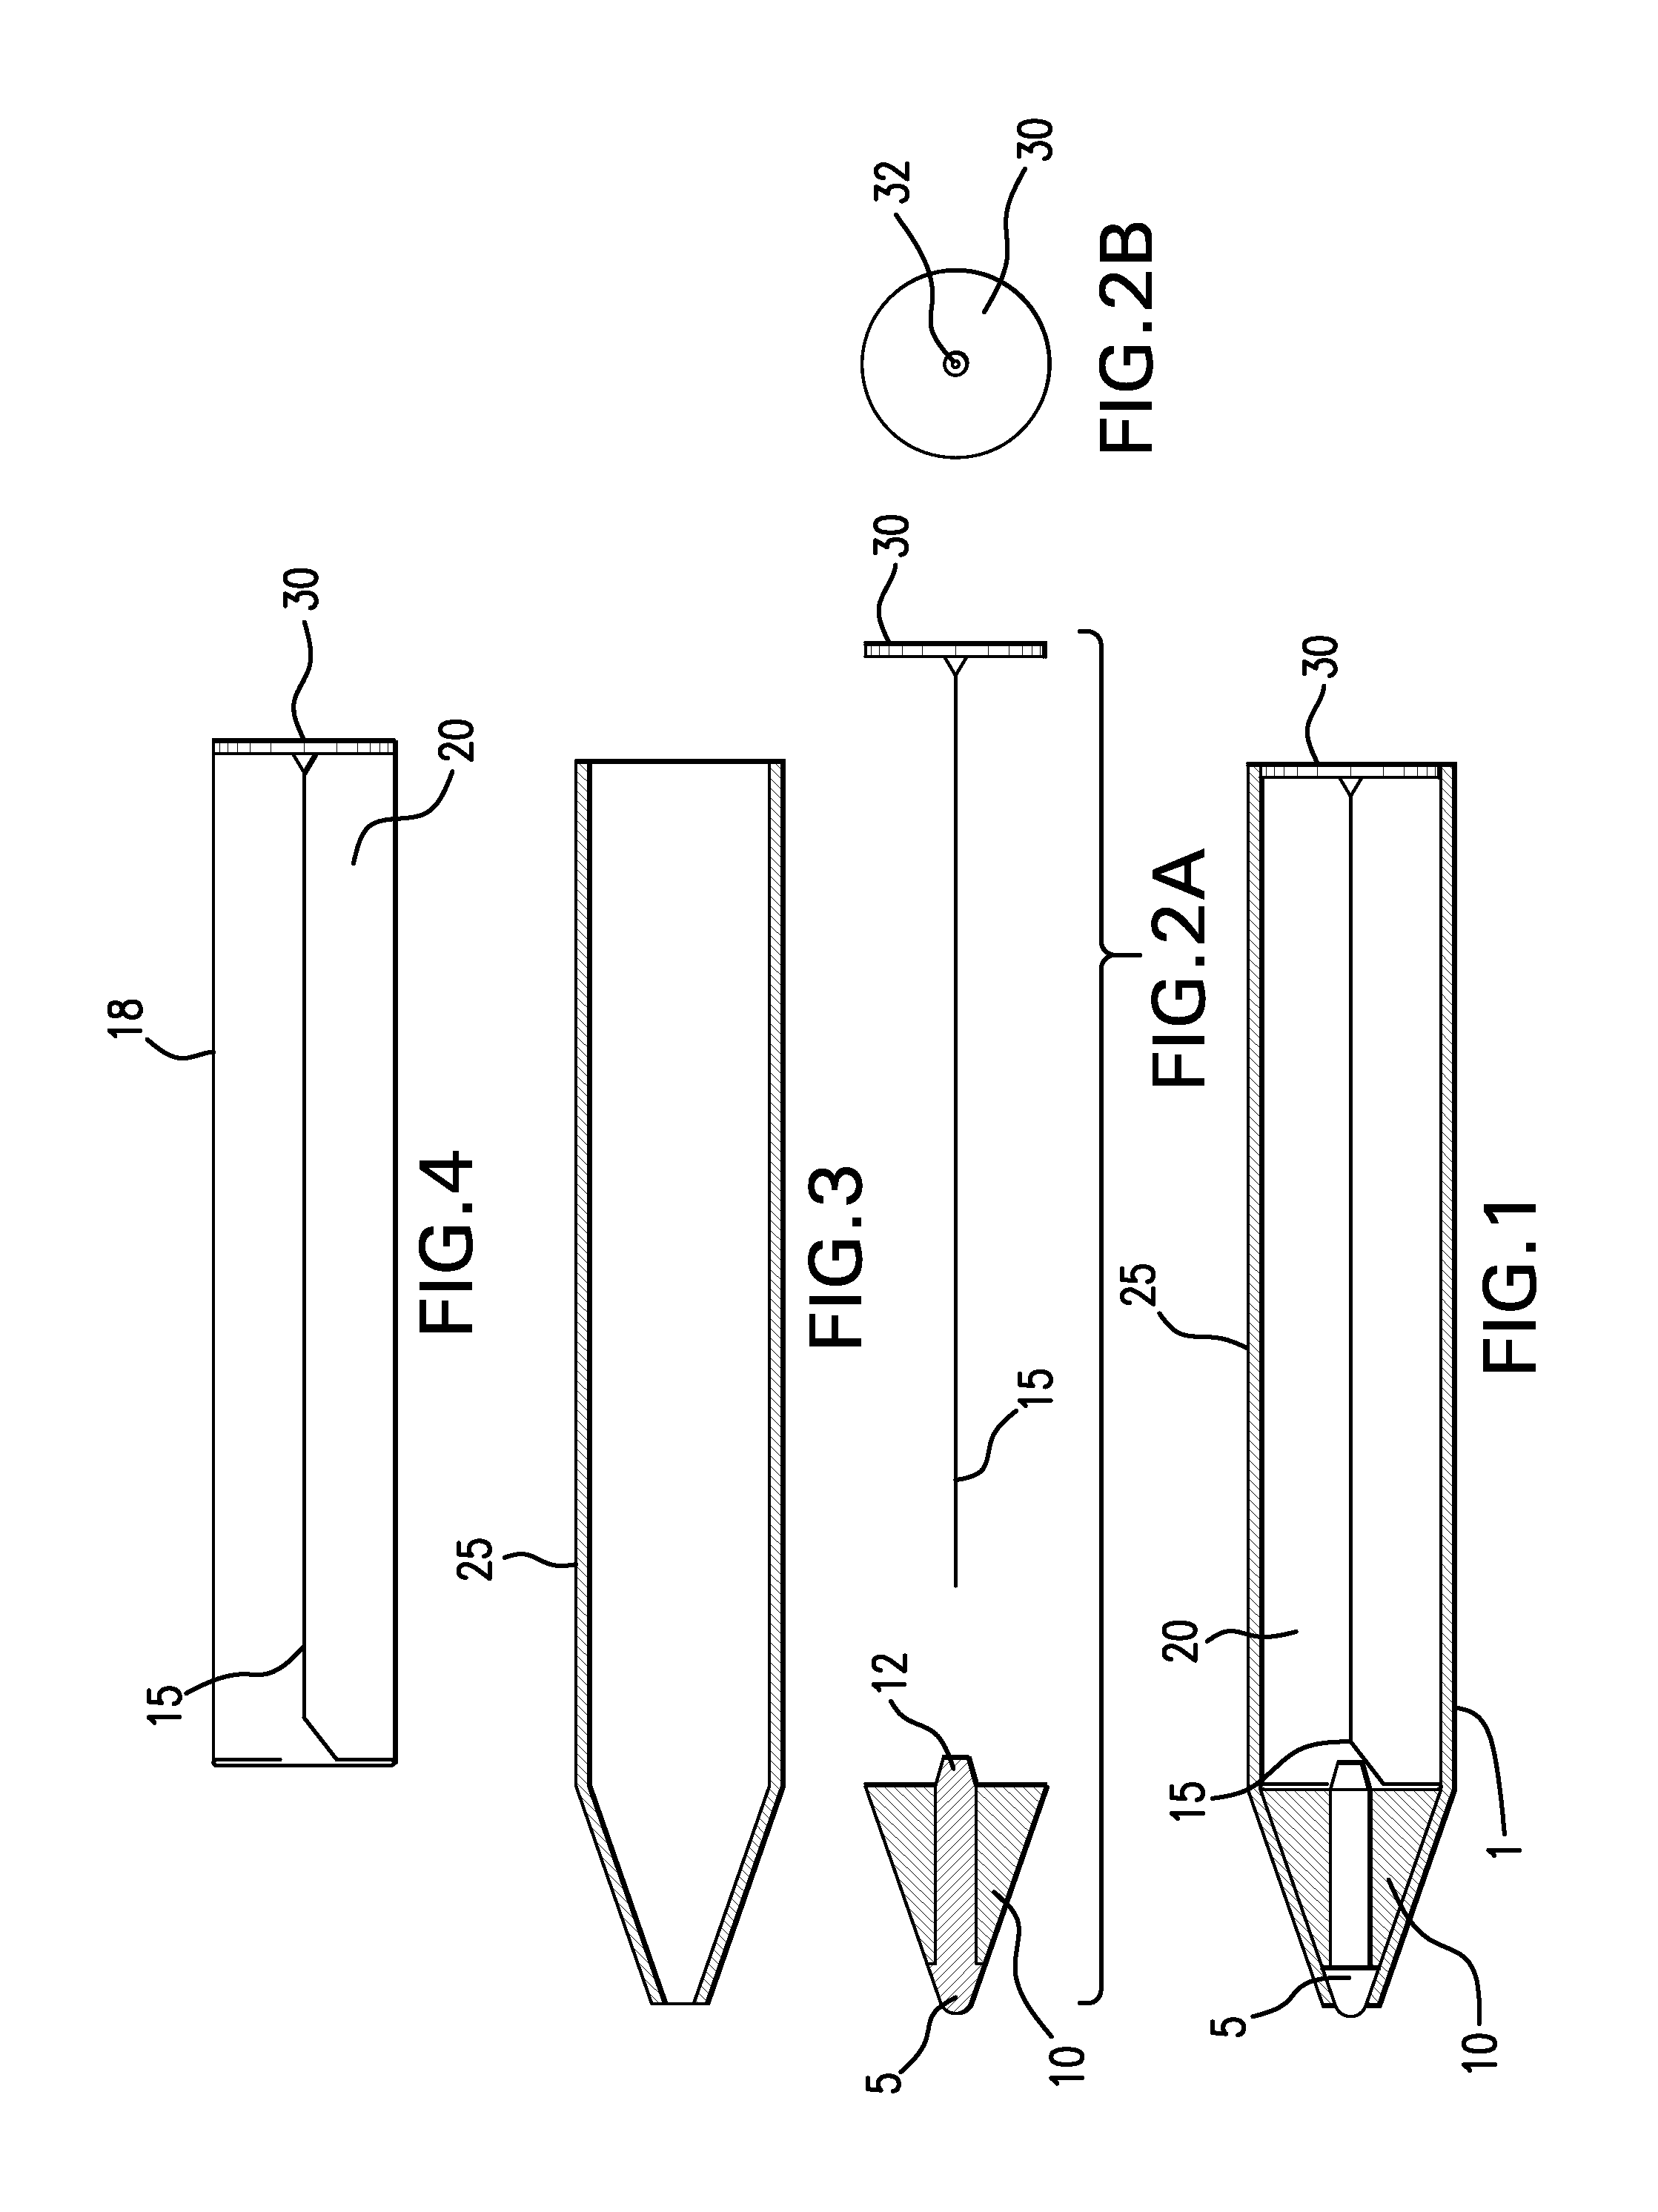 Apparatus and methods for testing impurity content in a precious metal